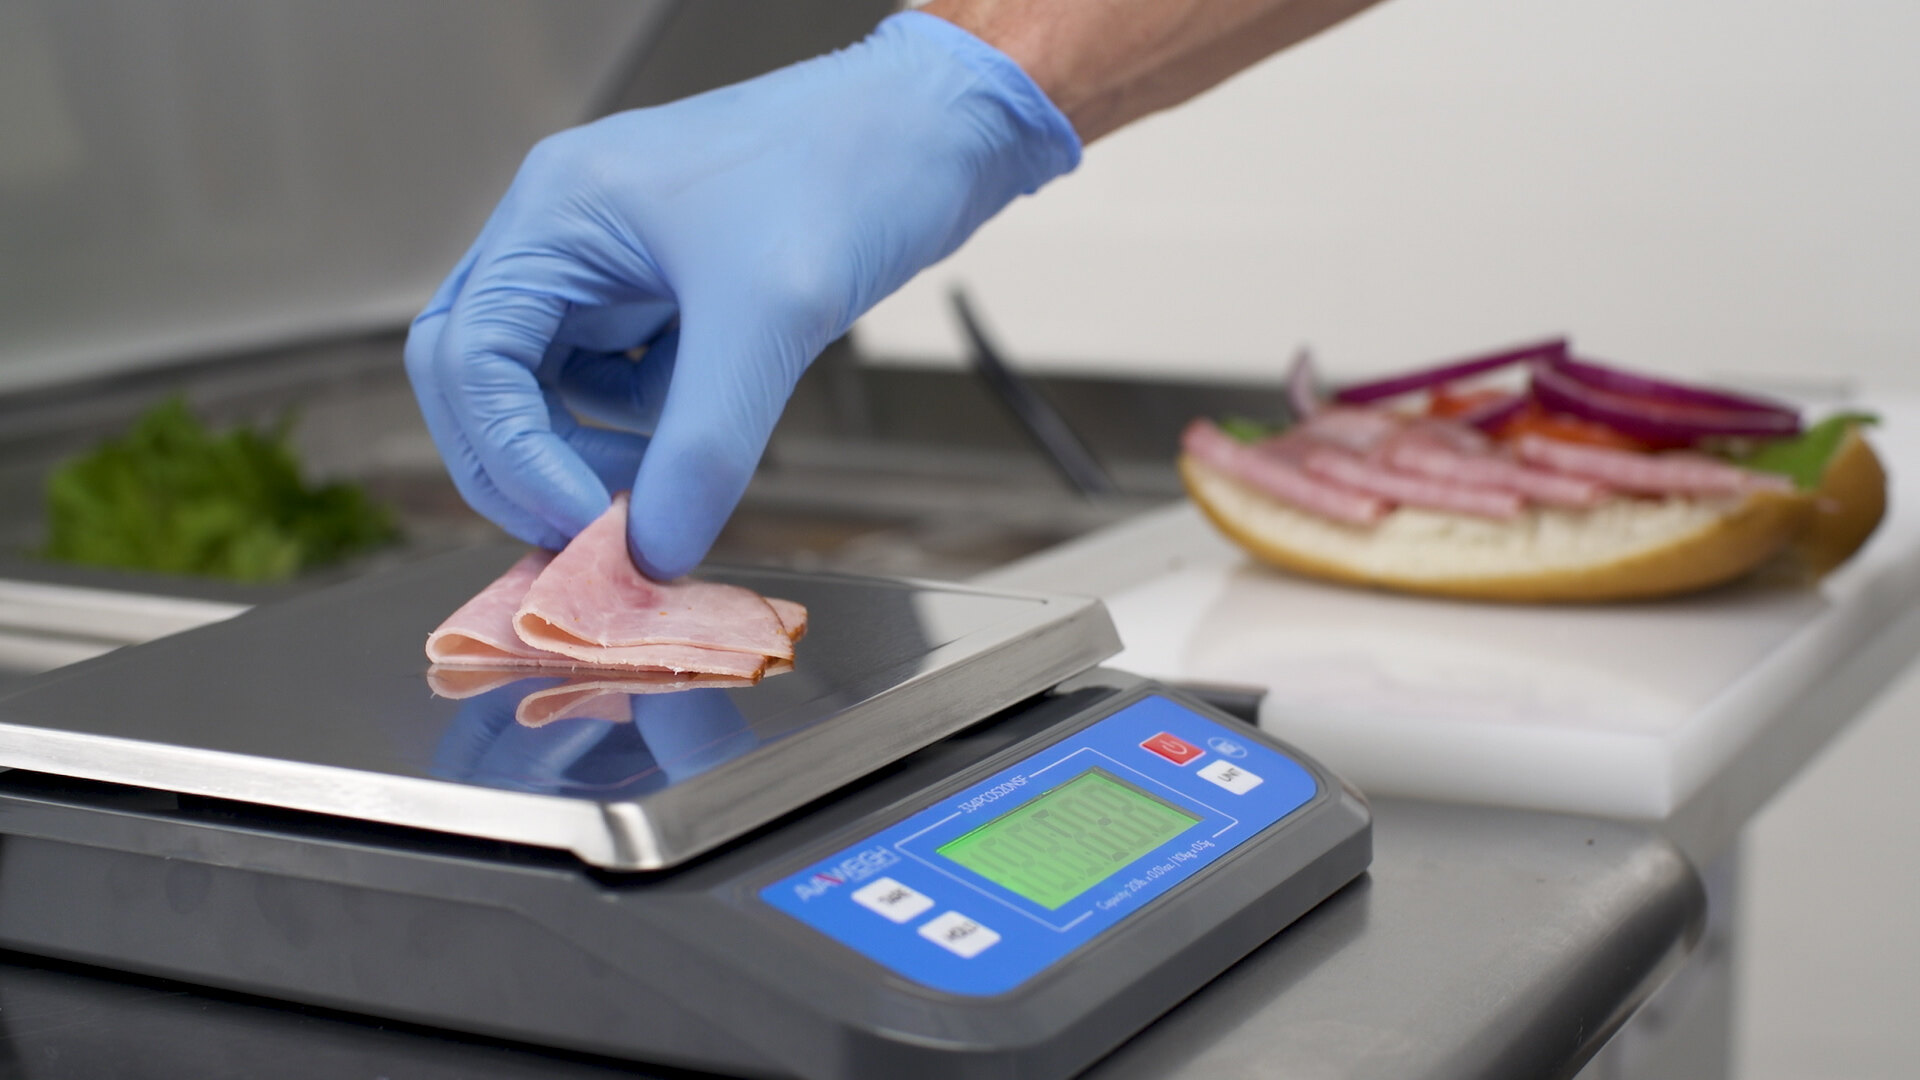 Food Portioning Scales 